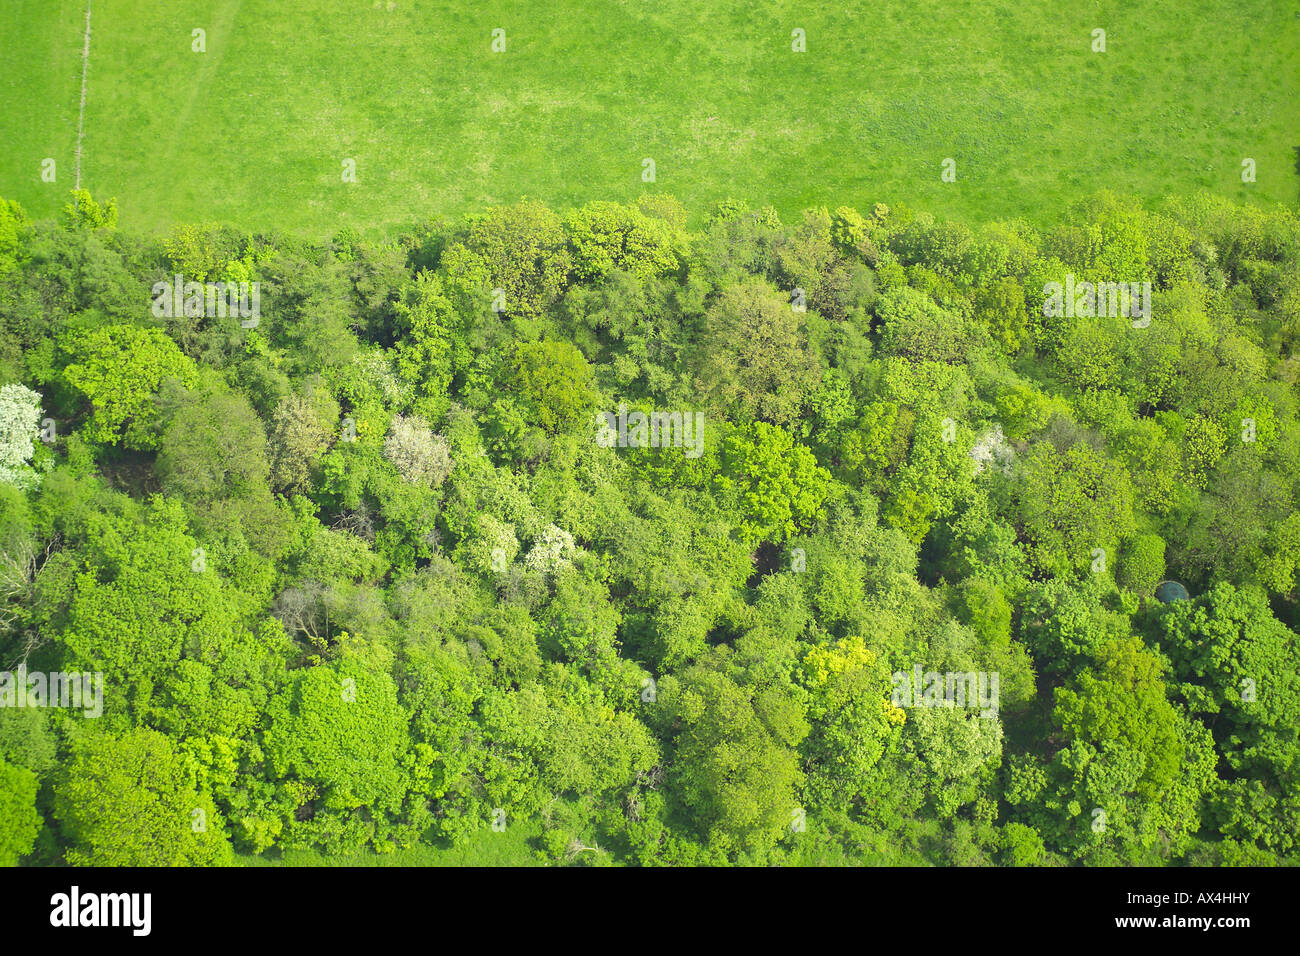 Aerial view of woodlands consisting of Deciduous Trees at the edge of a field Stock Photo